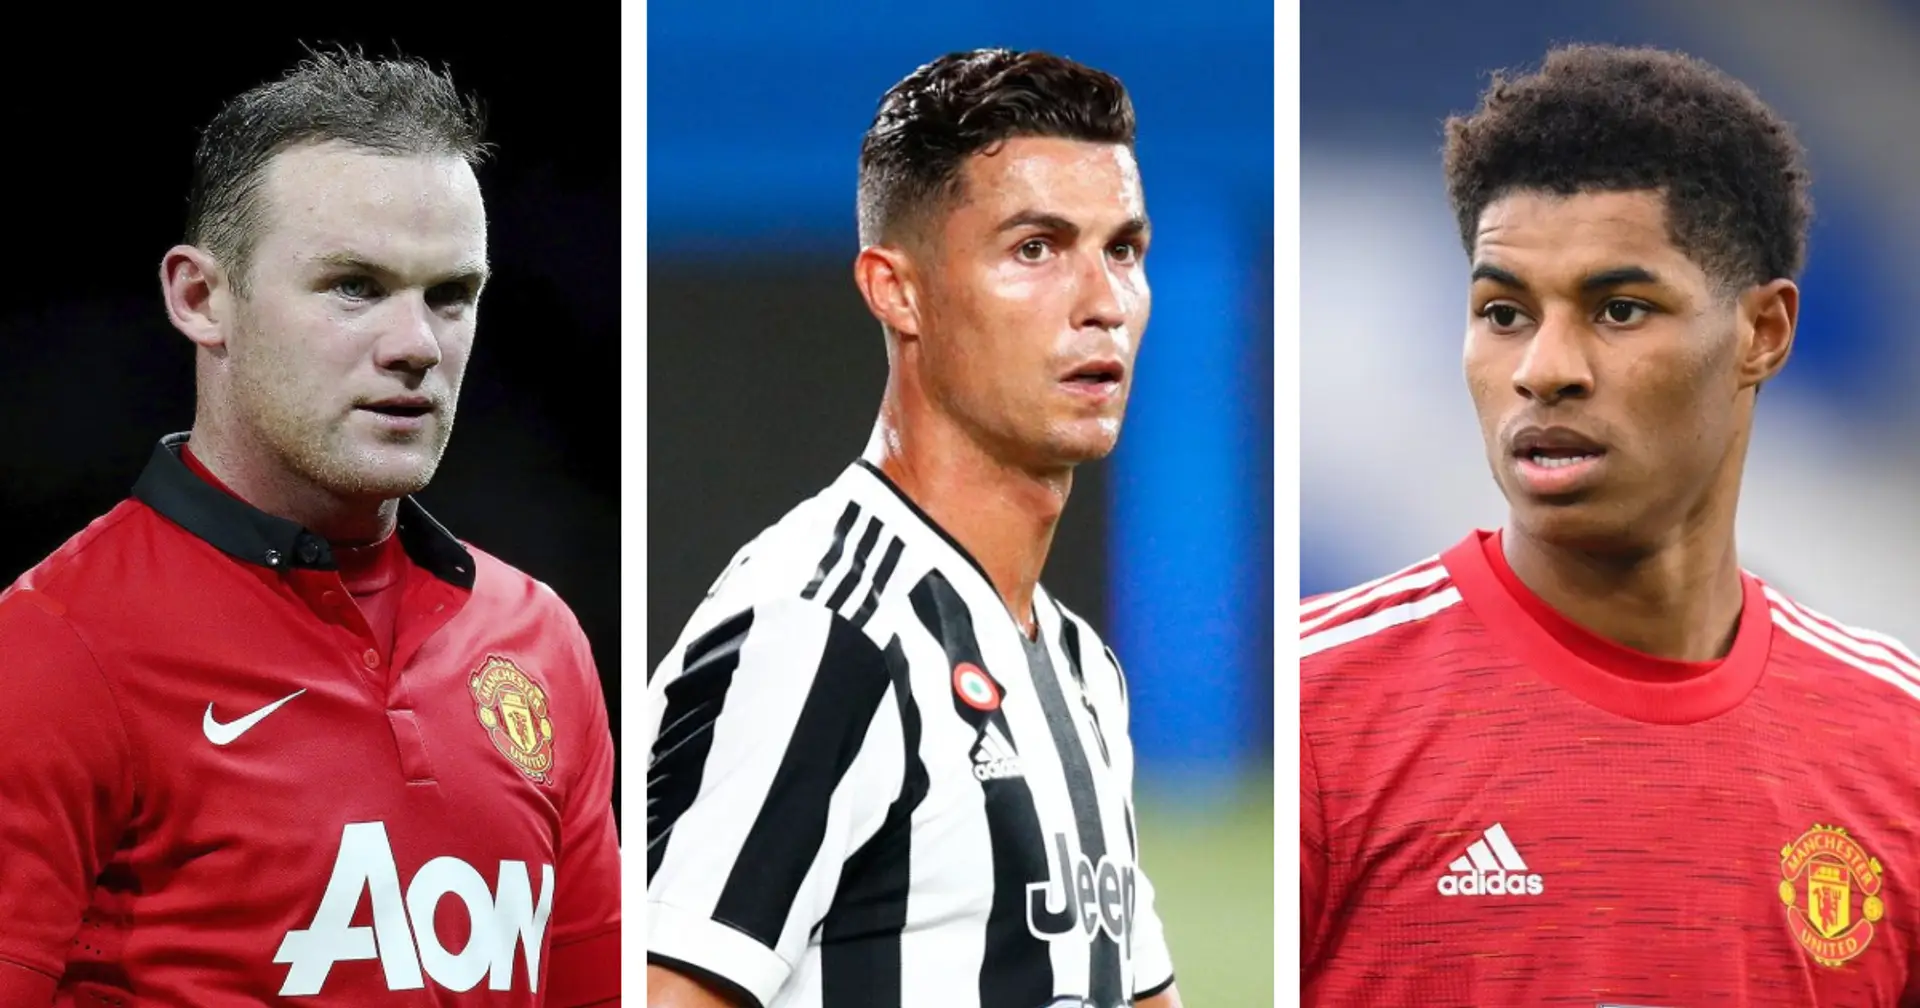 6 Man United top scorers since 2009 or 1 Cristiano Ronaldo? Guess who has scored more goals